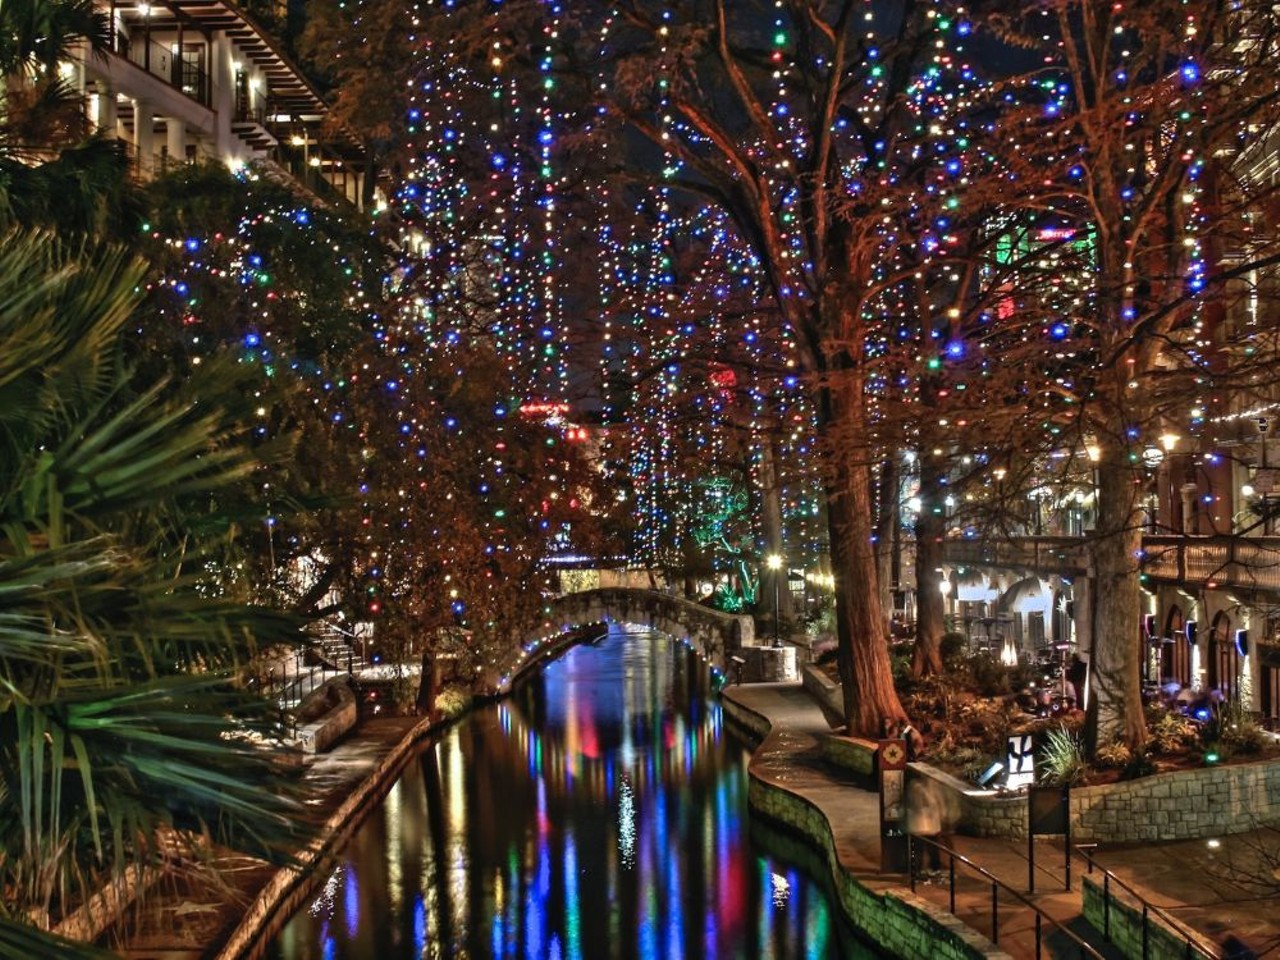 Stroll the River Walk to look at the lights
You don't have to be a tourist to wander the River Walk and take in the lights. It's romantic, and your out-of-town guests will expect a tour. While the lights will be on every night from November 24-January 7, you can also catch fun events like the Ford Fiesta de las Luminarias on select weekends.